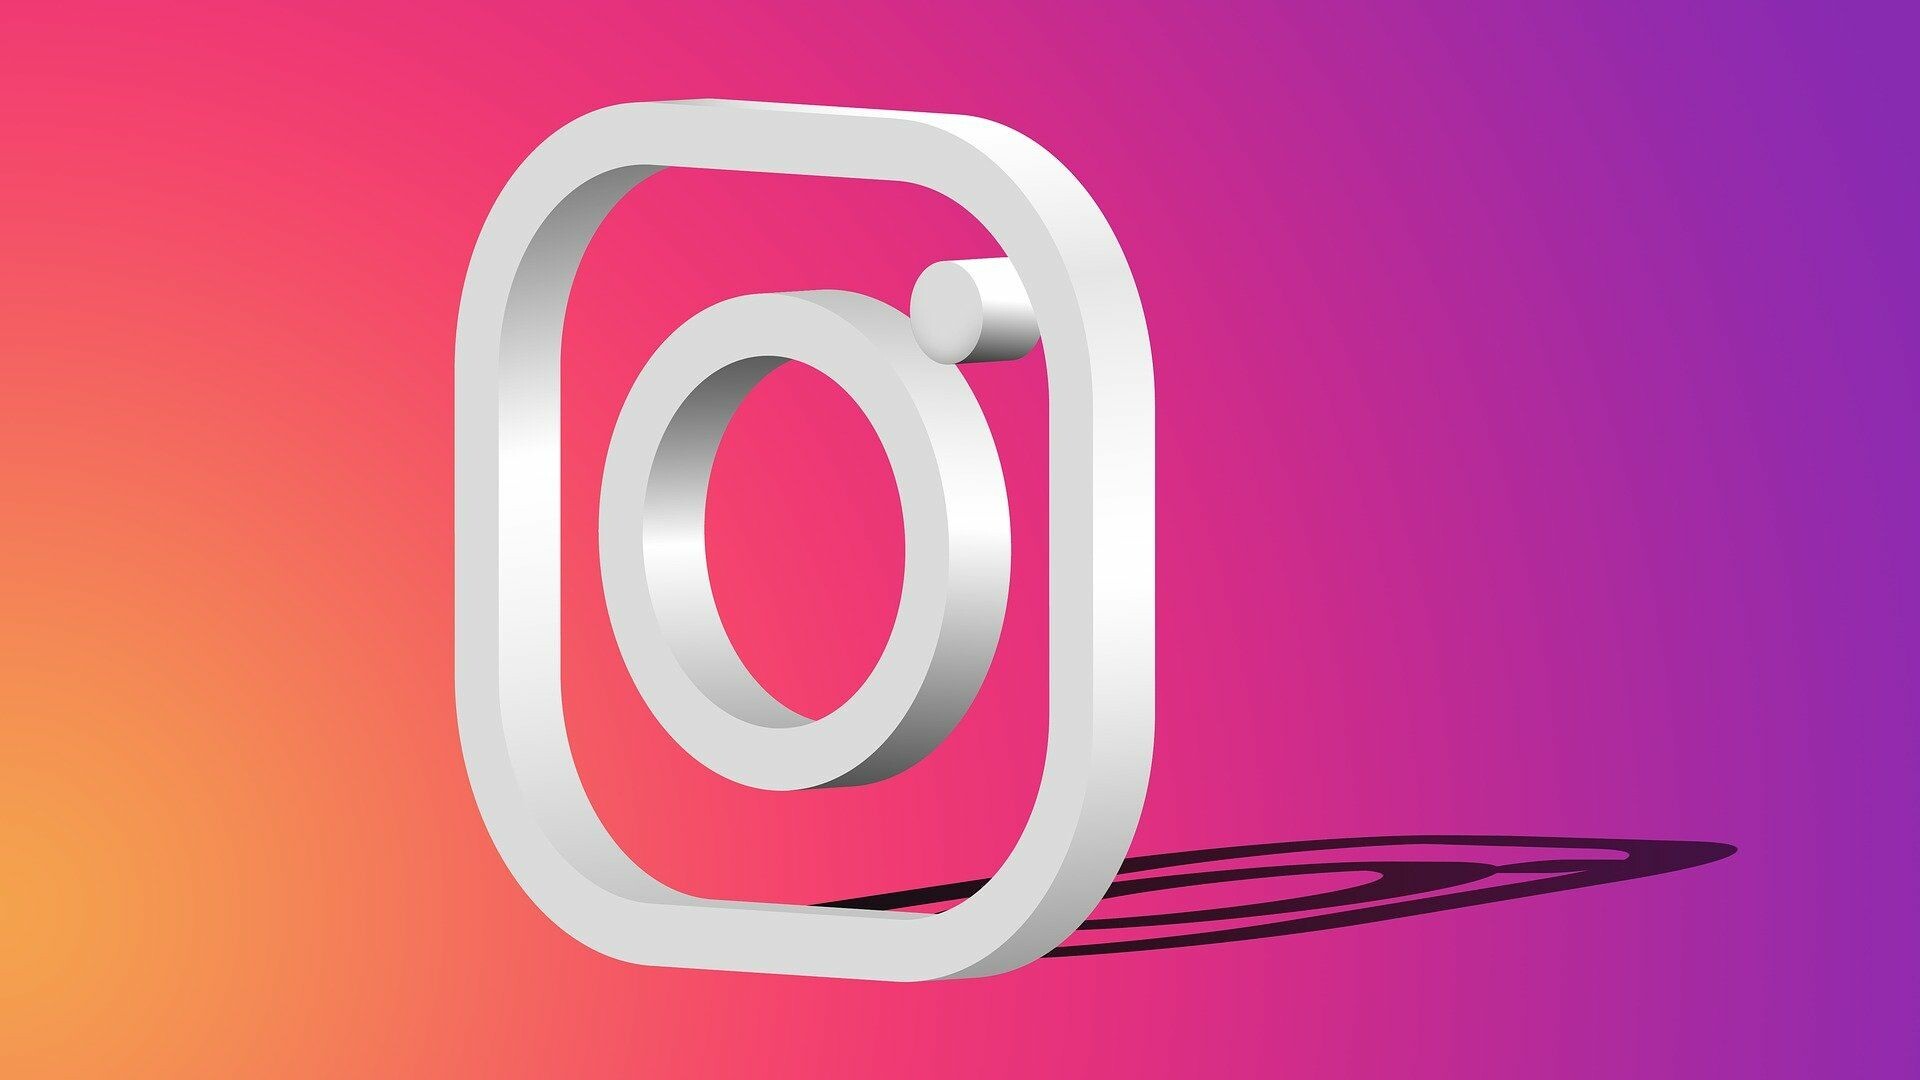 Instagram: A photo based social network, Bought by Facebook in 2012. 1920x1080 Full HD Wallpaper.